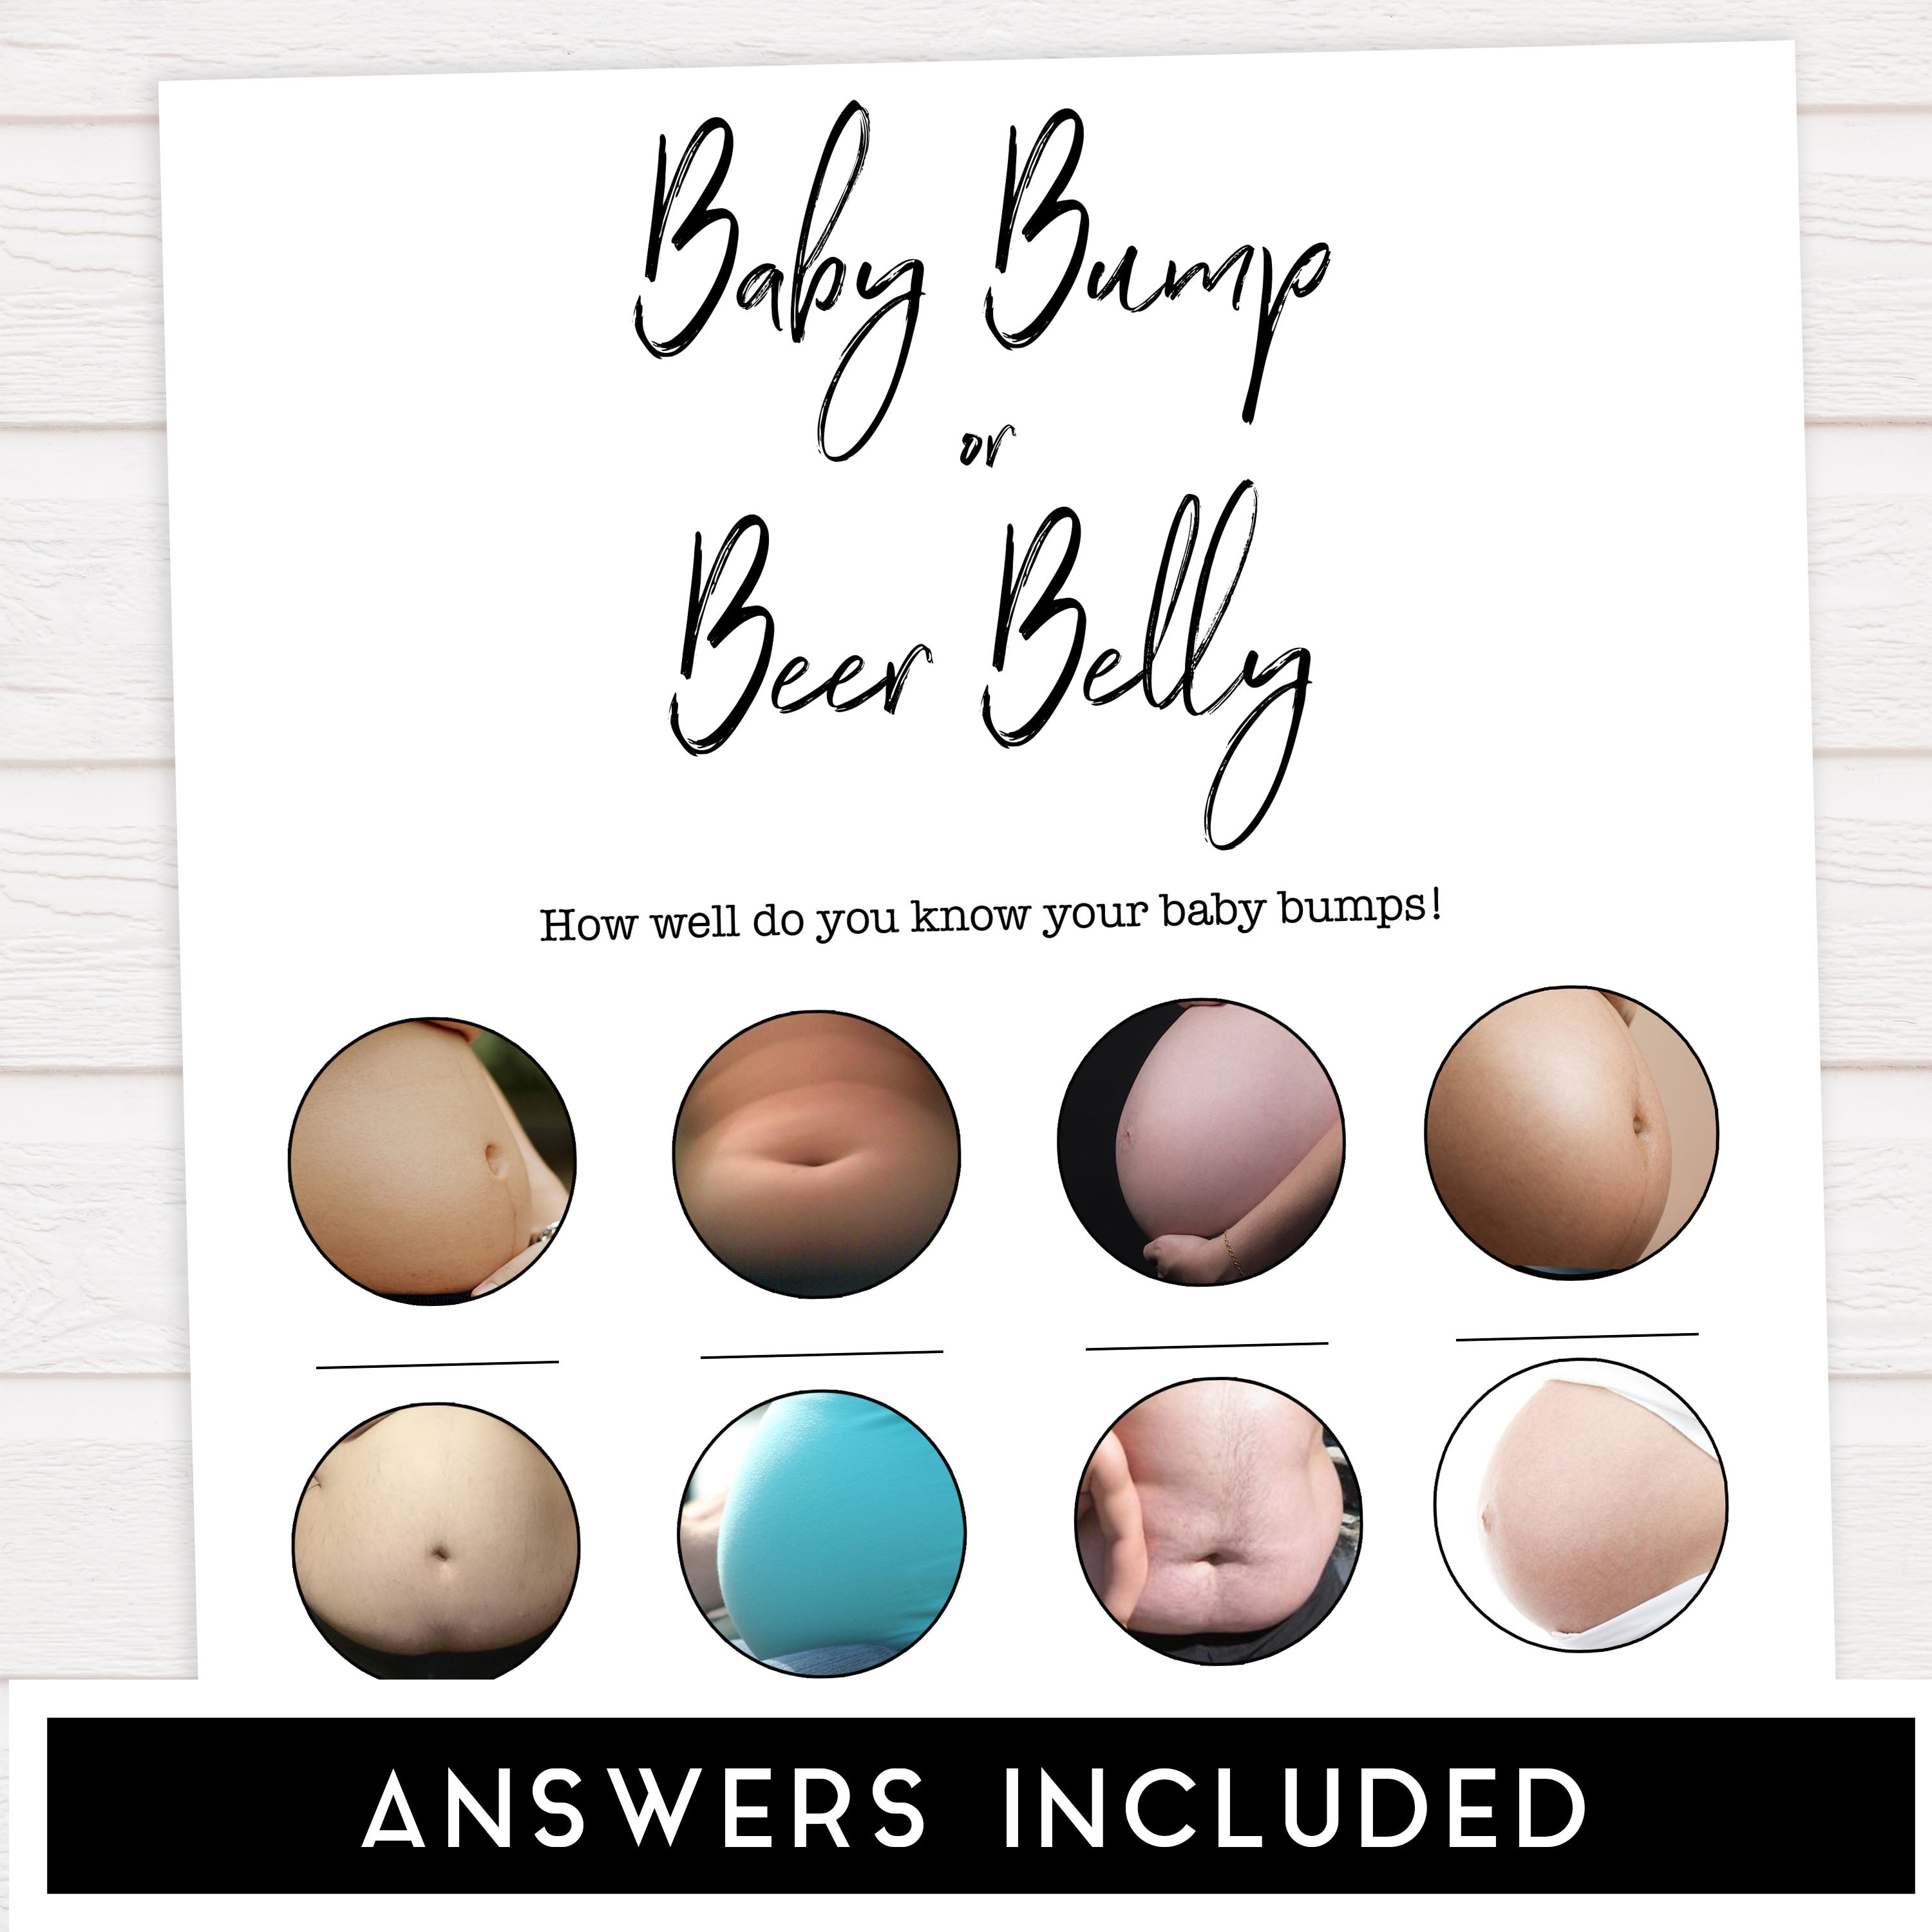 labor or porn, baby bump, boobs or butts game, printable baby shower games, gender neutral baby shower ideas, fun baby game ideas